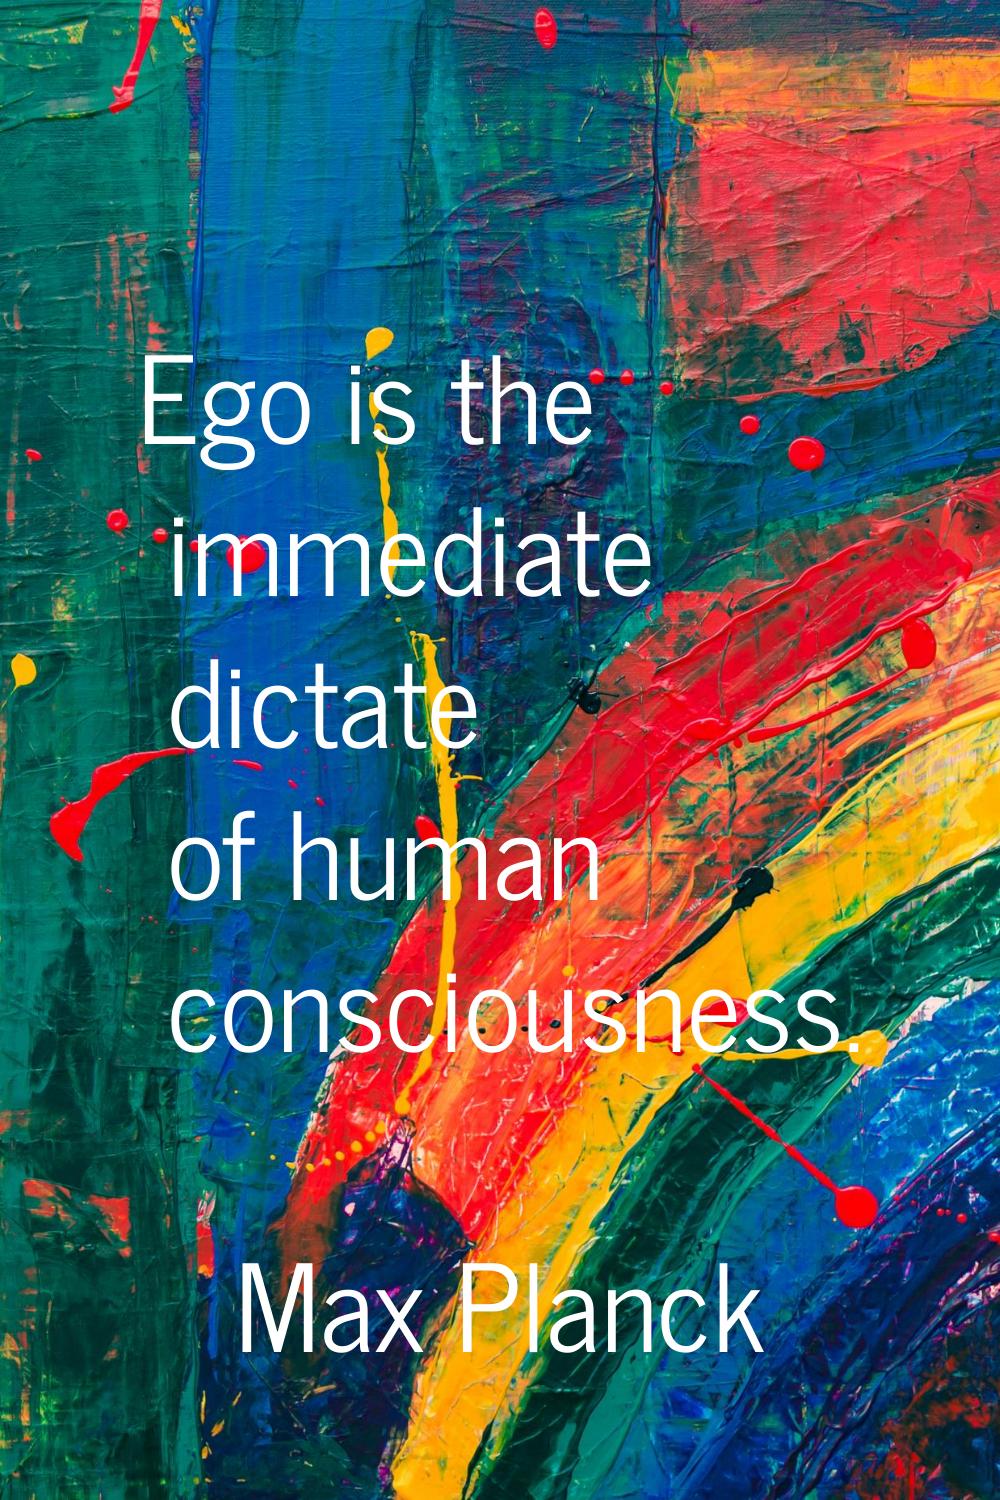 Ego is the immediate dictate of human consciousness.